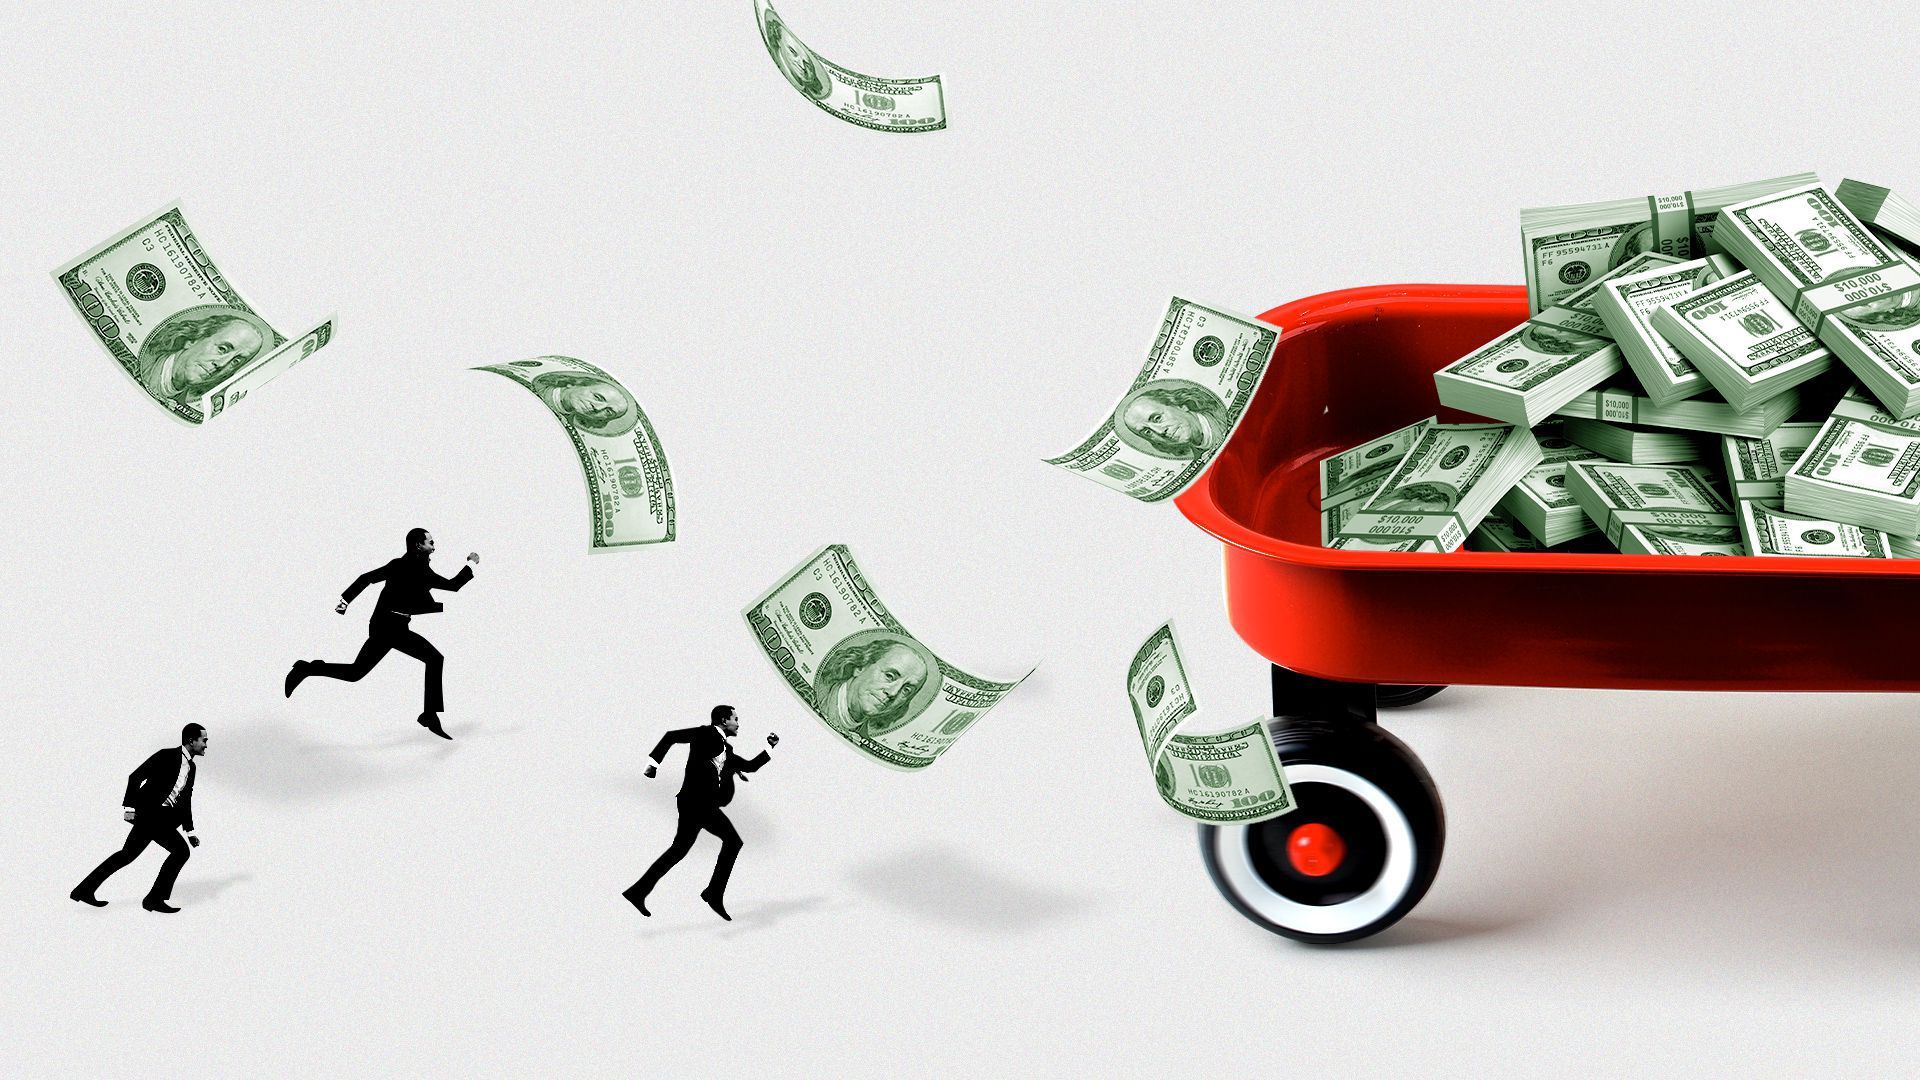 An illustration of people chasing a wagon of cash